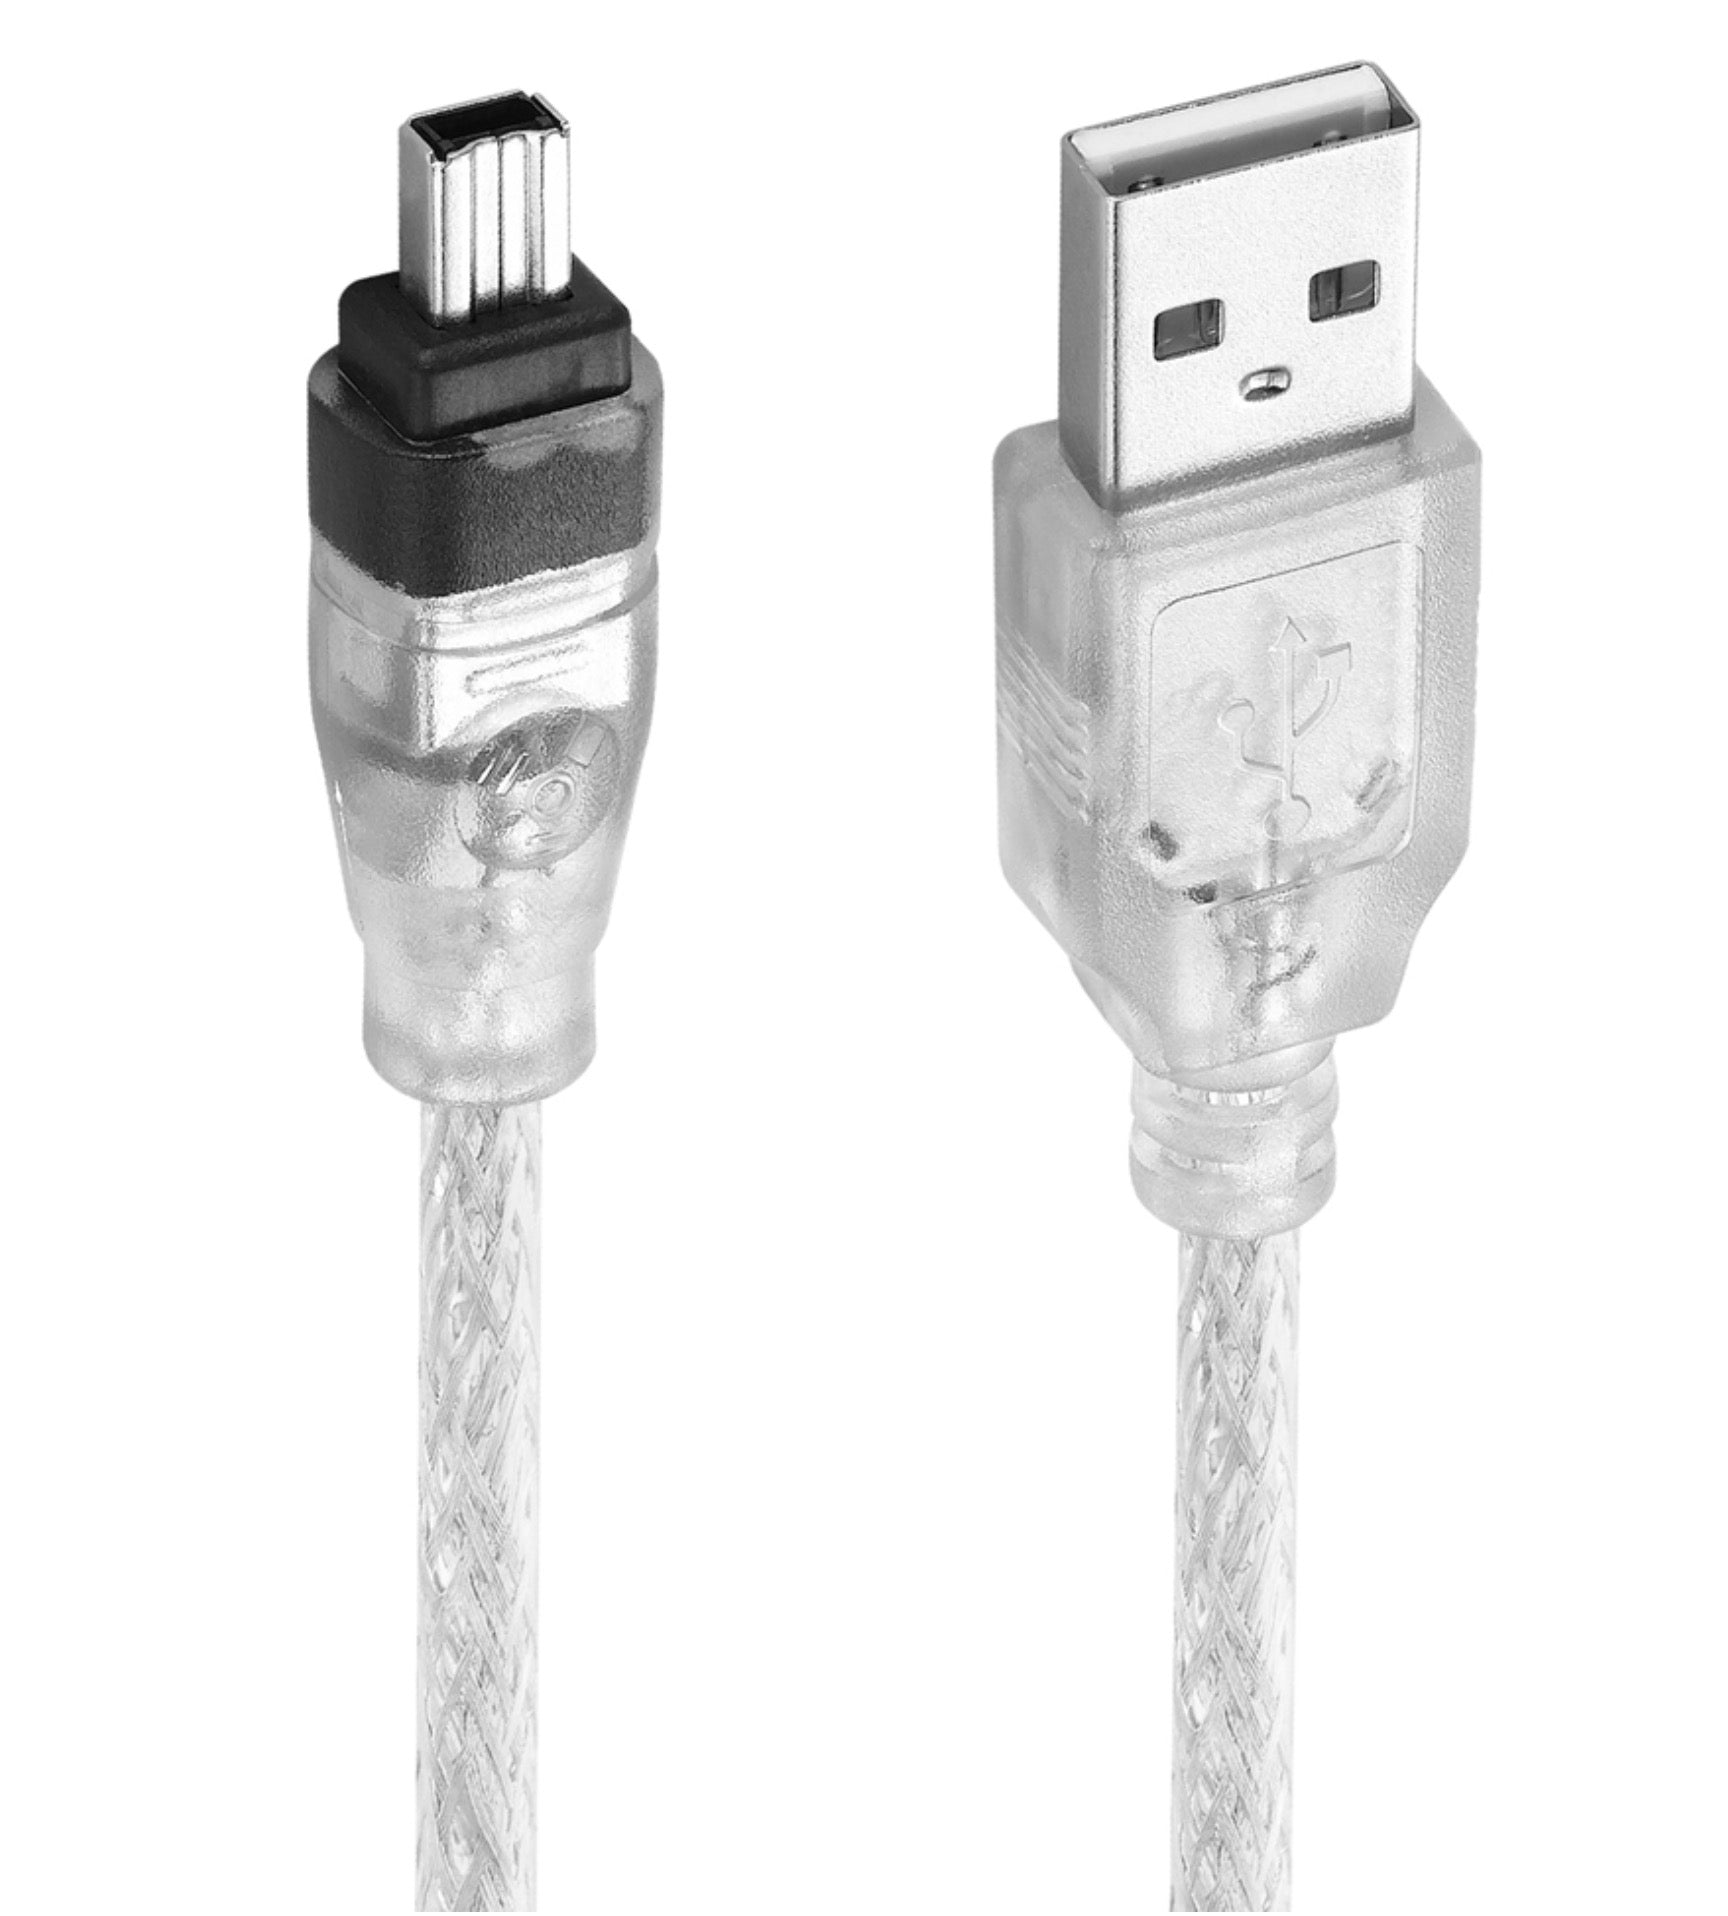 USB 2.0 A Male to 4Pin Firewire IEEE1394 Male Cable 1.5m